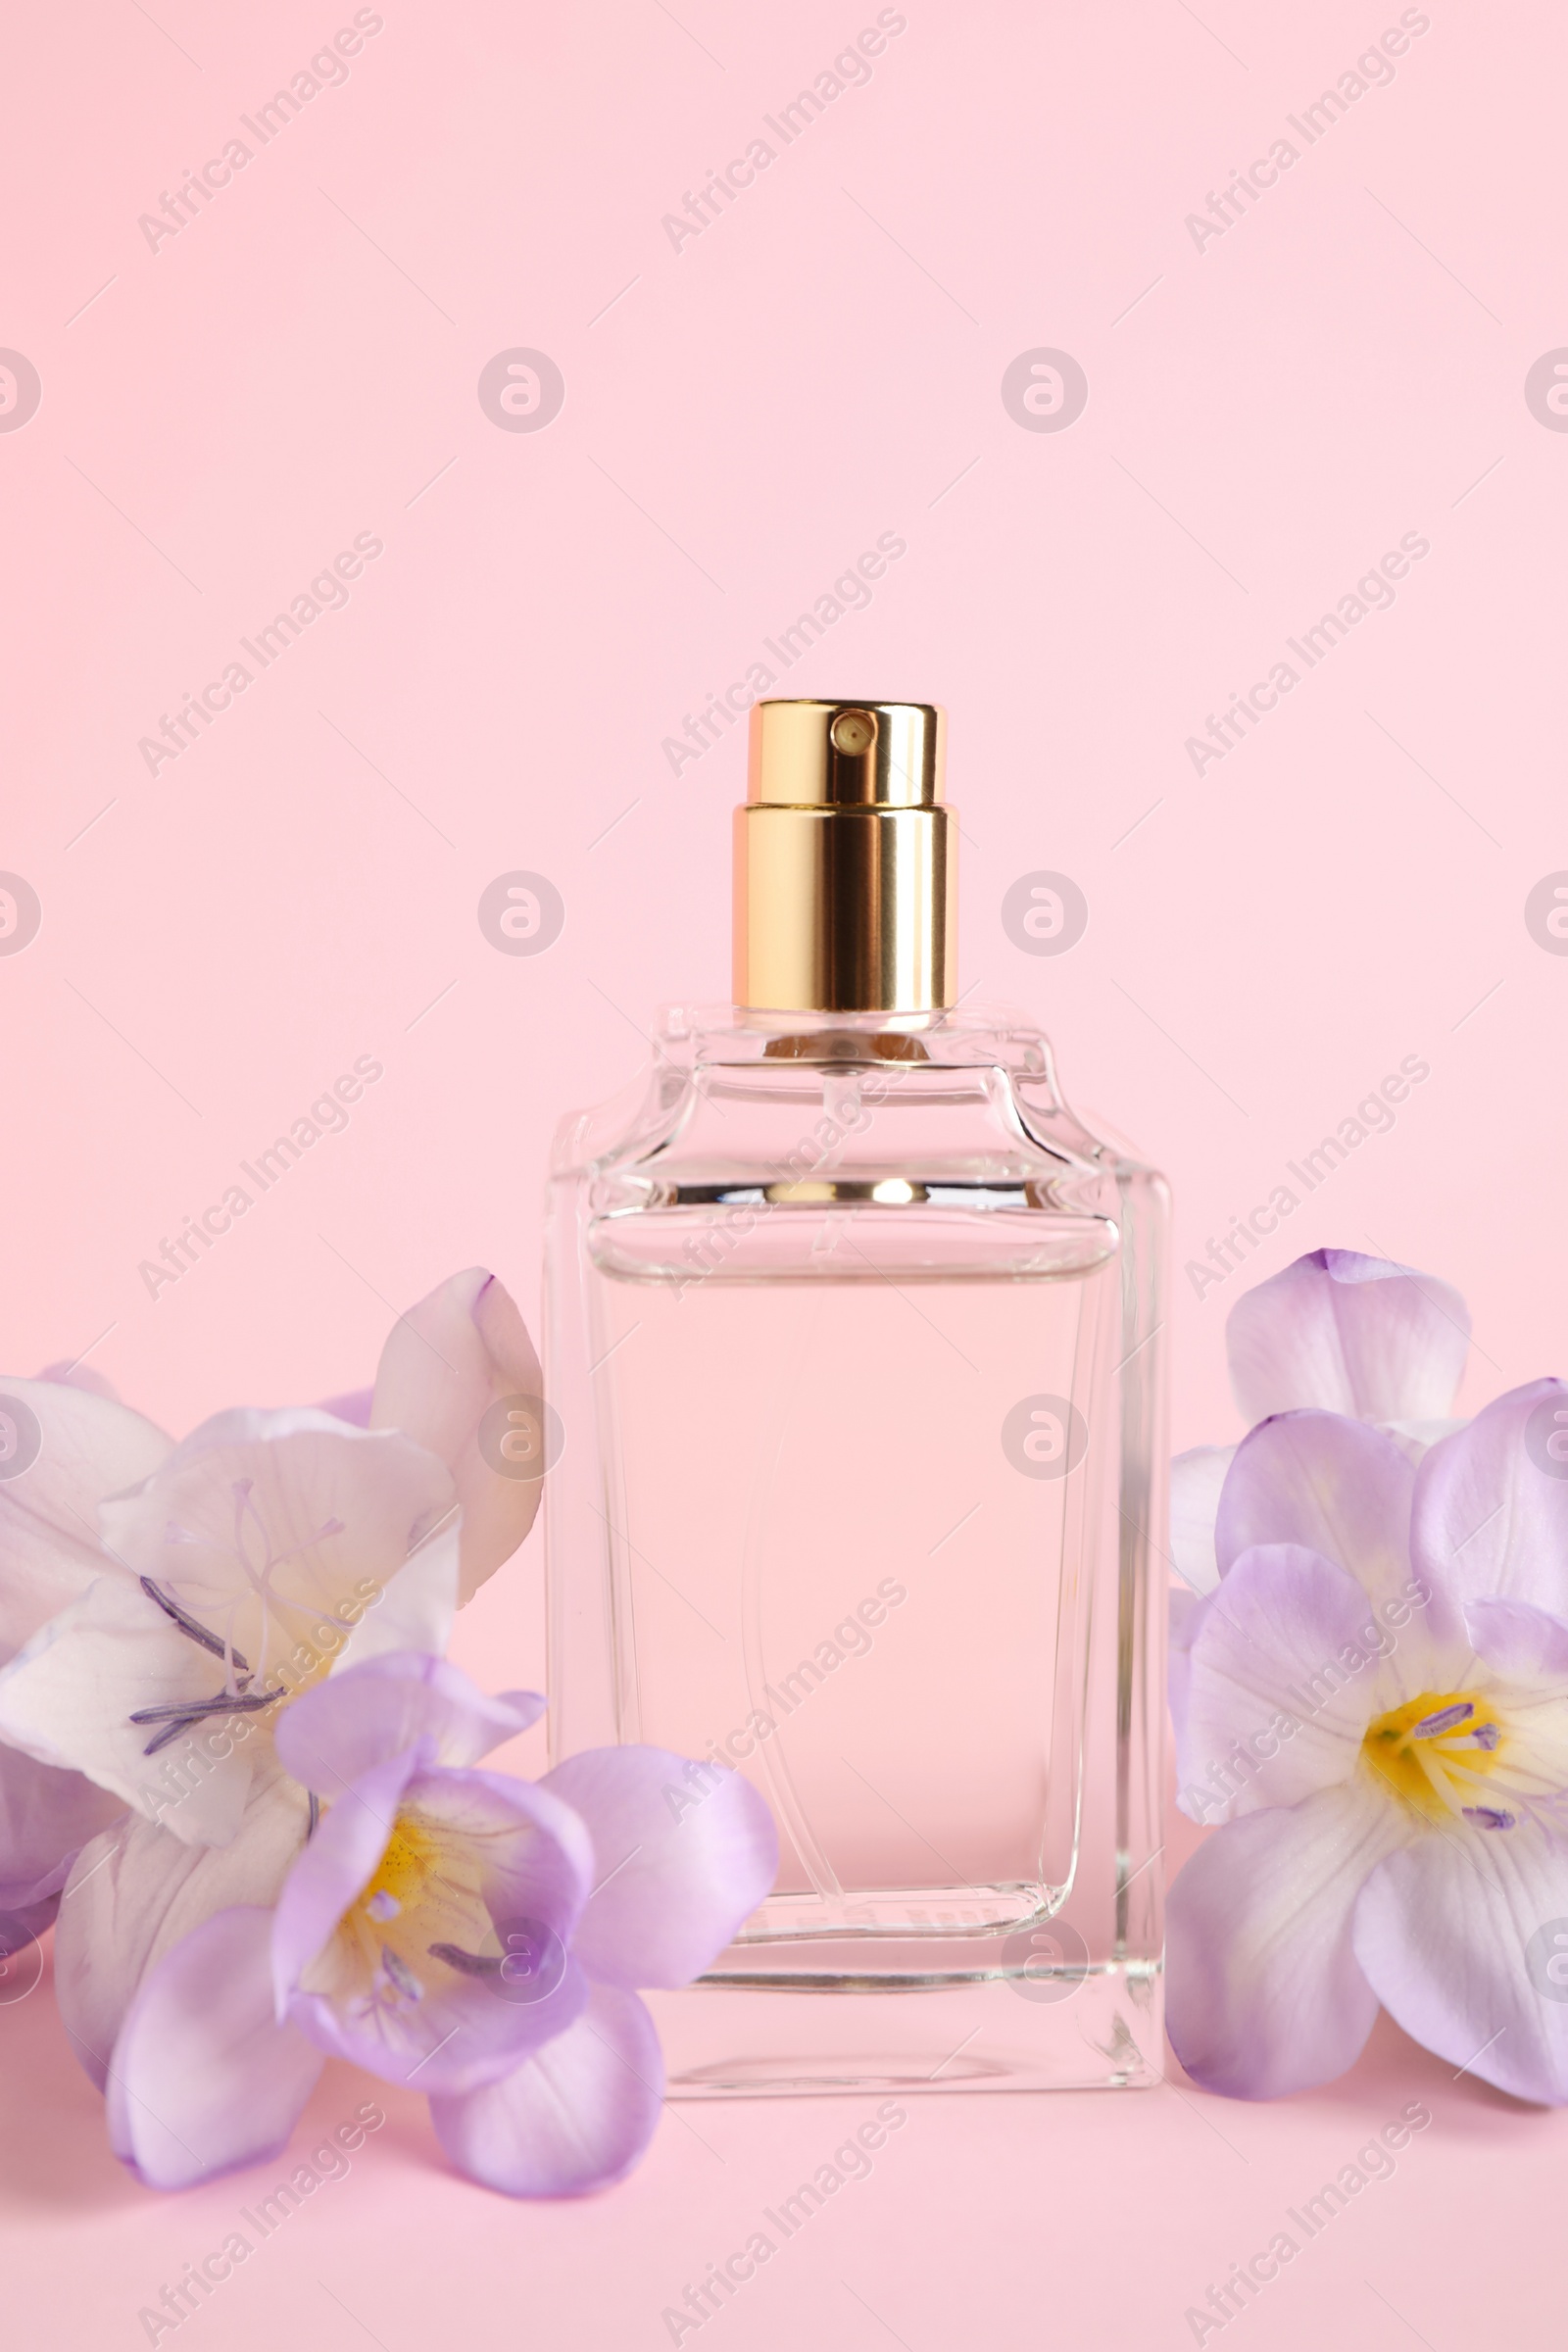 Photo of Bottle of perfume with freesia flowers on pink background